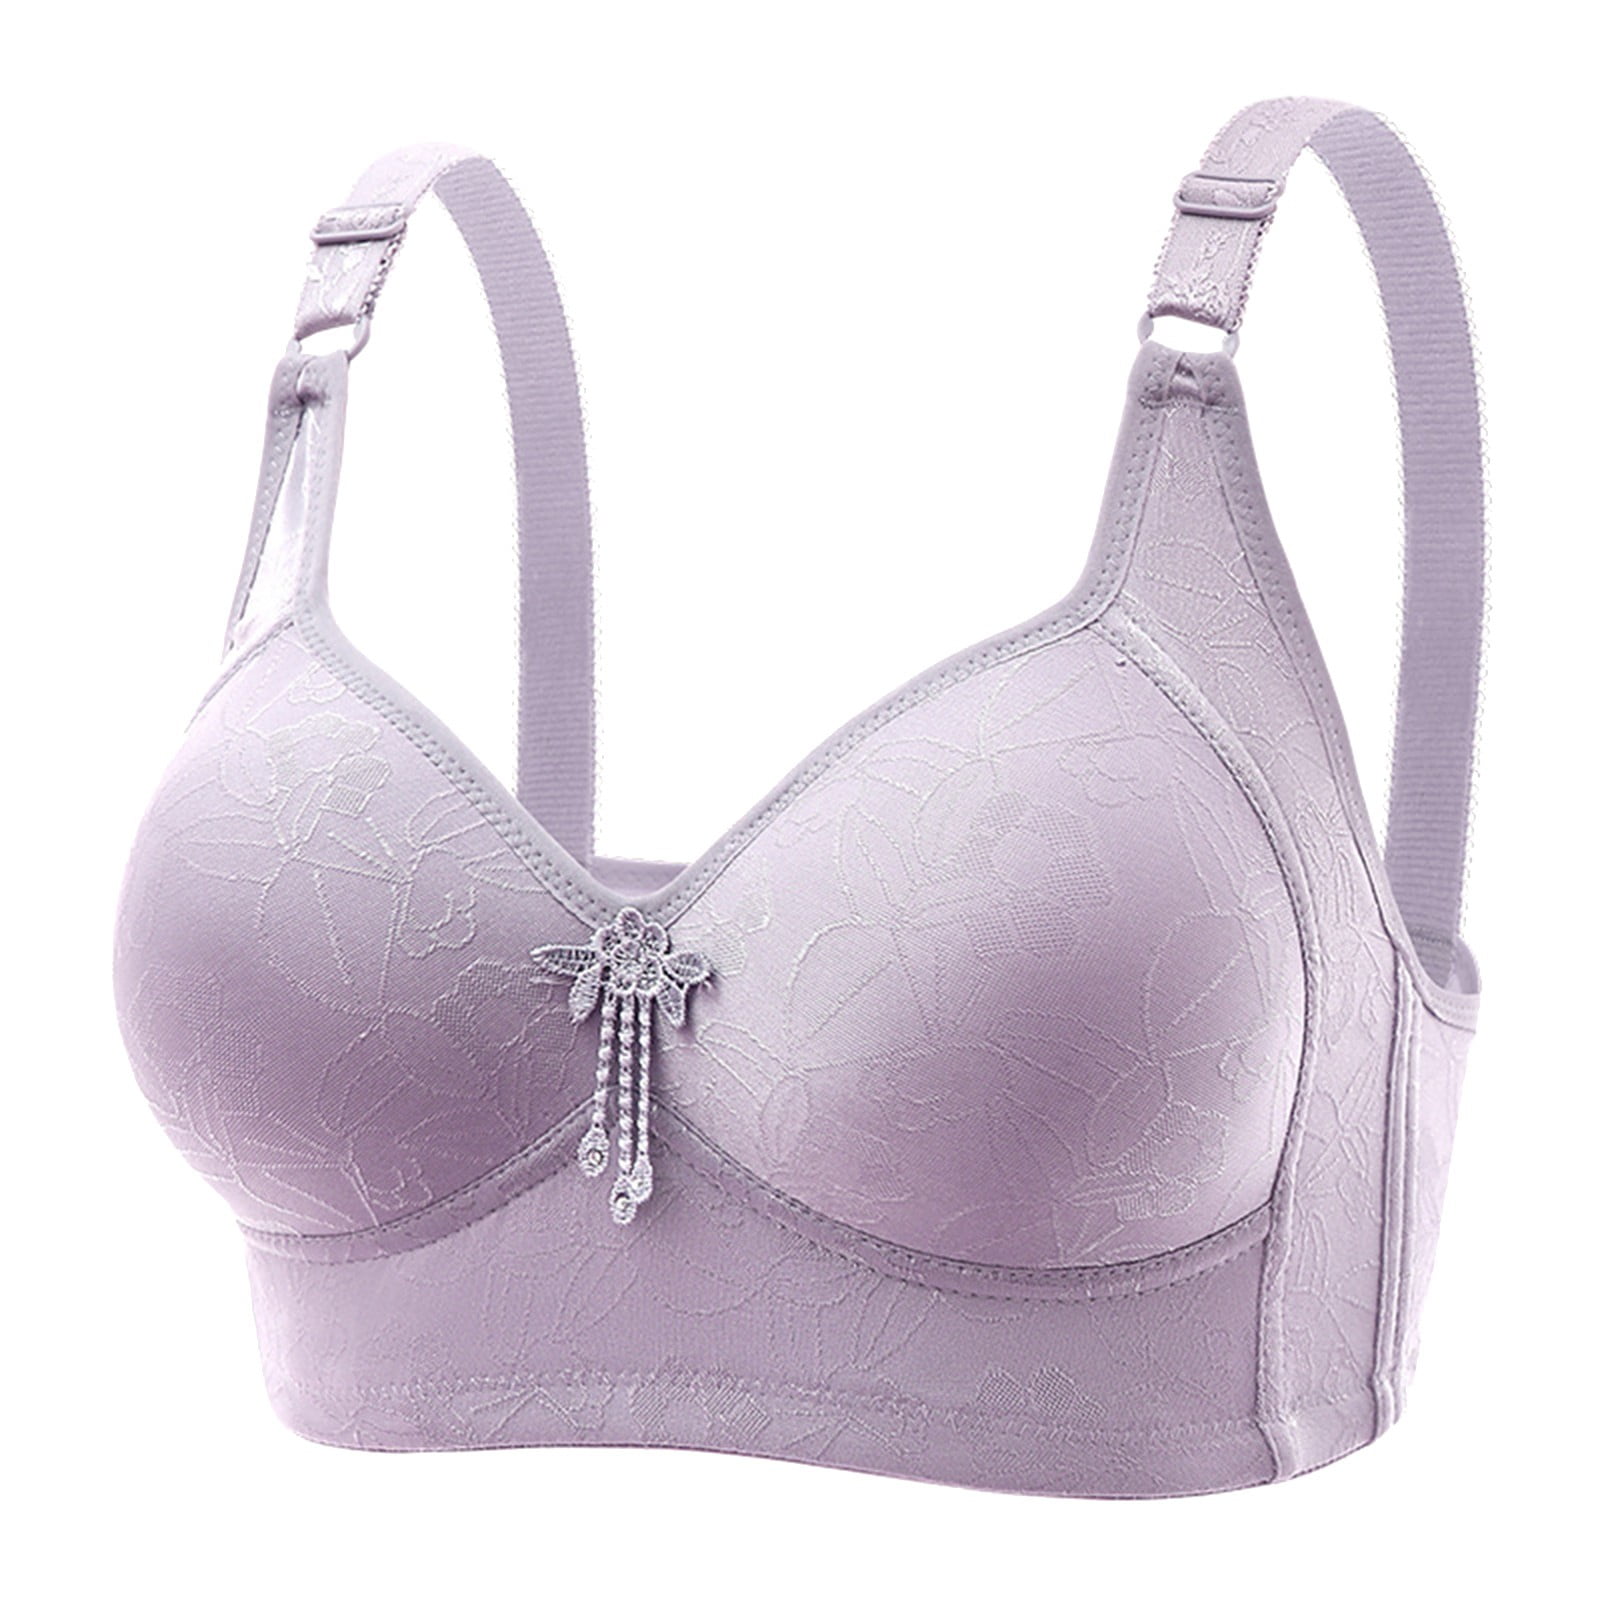 Pedort Adhesive Bra Comfortable Breathable Lisa Charm Daisy Bra, Front  Snaps Full Coverage Bras for Women A,40 